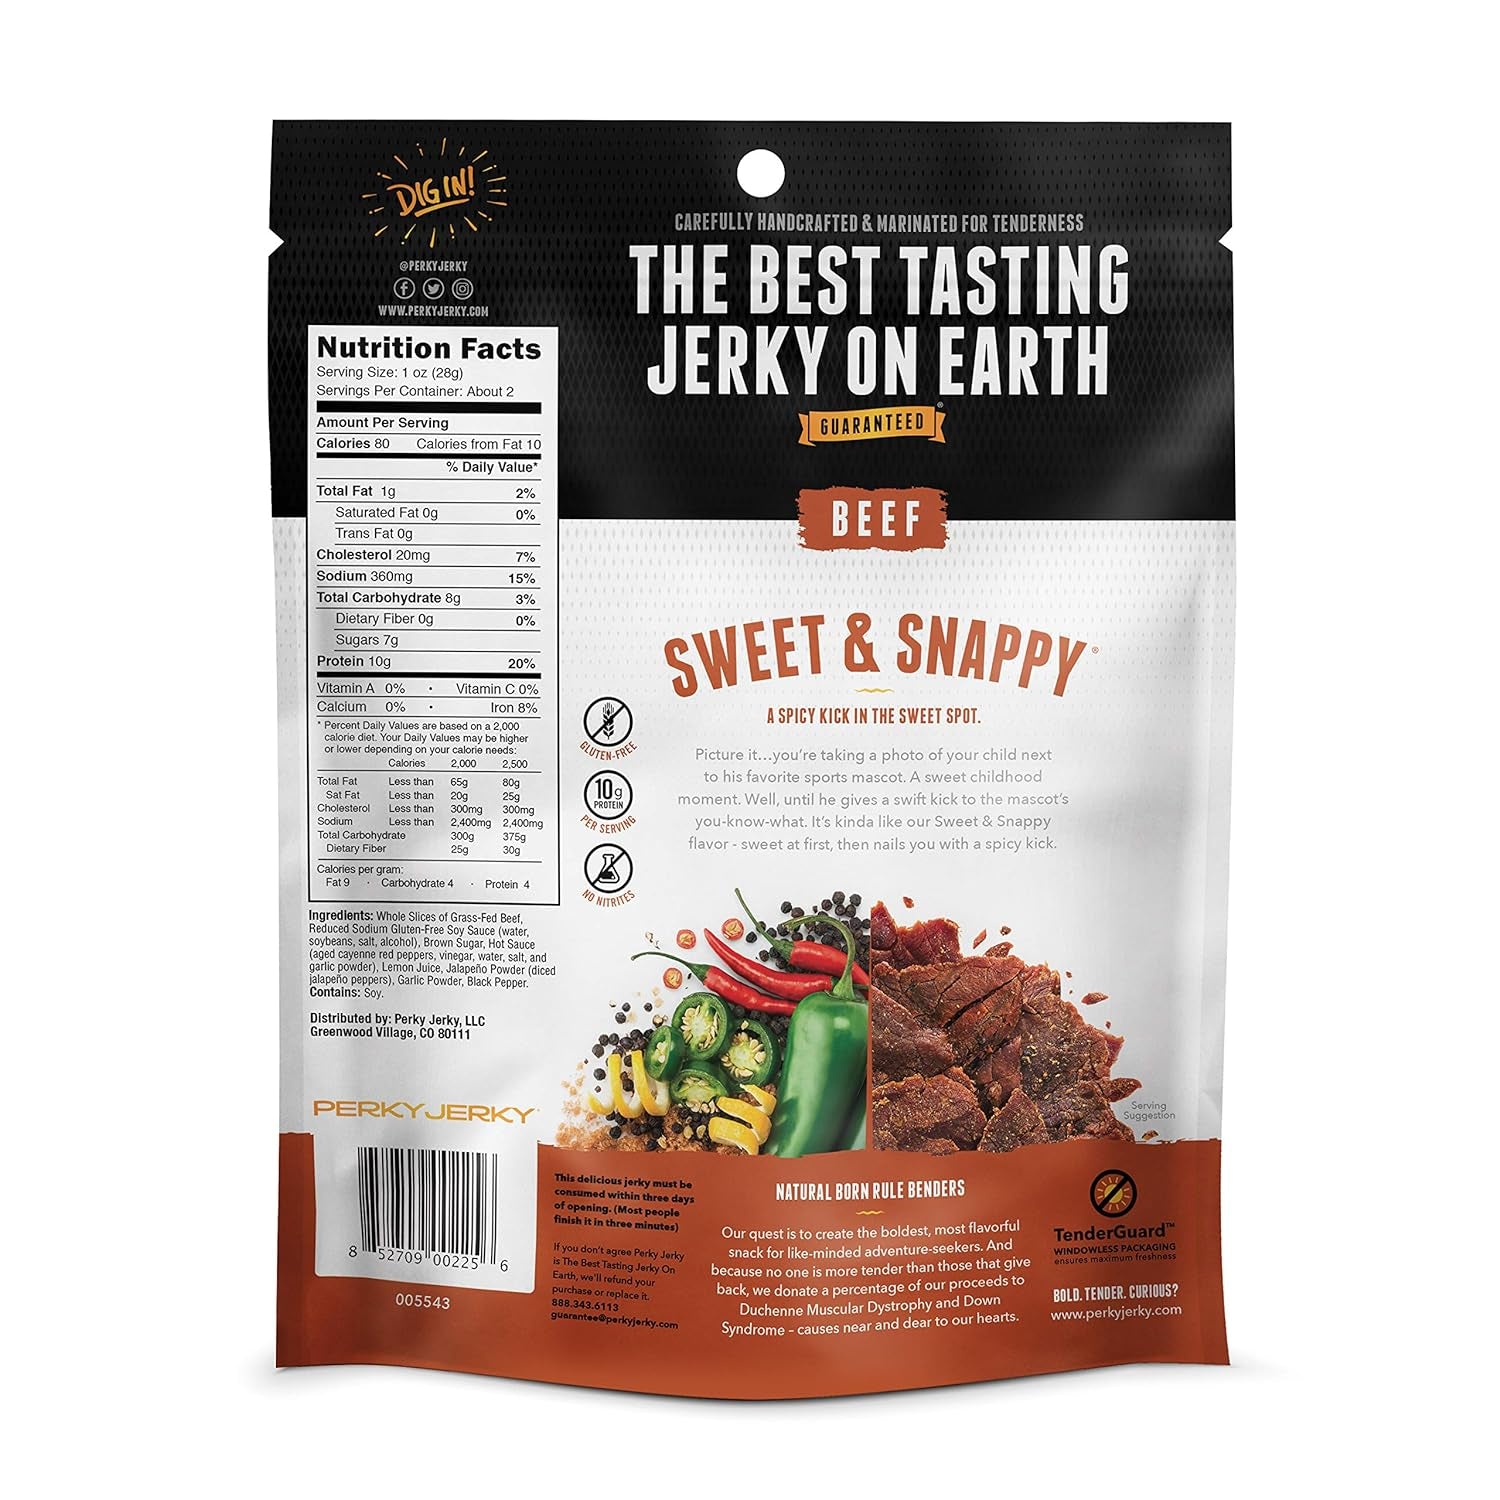 Sweet and Snappy 100% Grass Fed Beef Jerky, 2.2Oz (Pack of 12) - Antibiotic Free - 10G Protein per Serving - Low Fat - Tender Texture